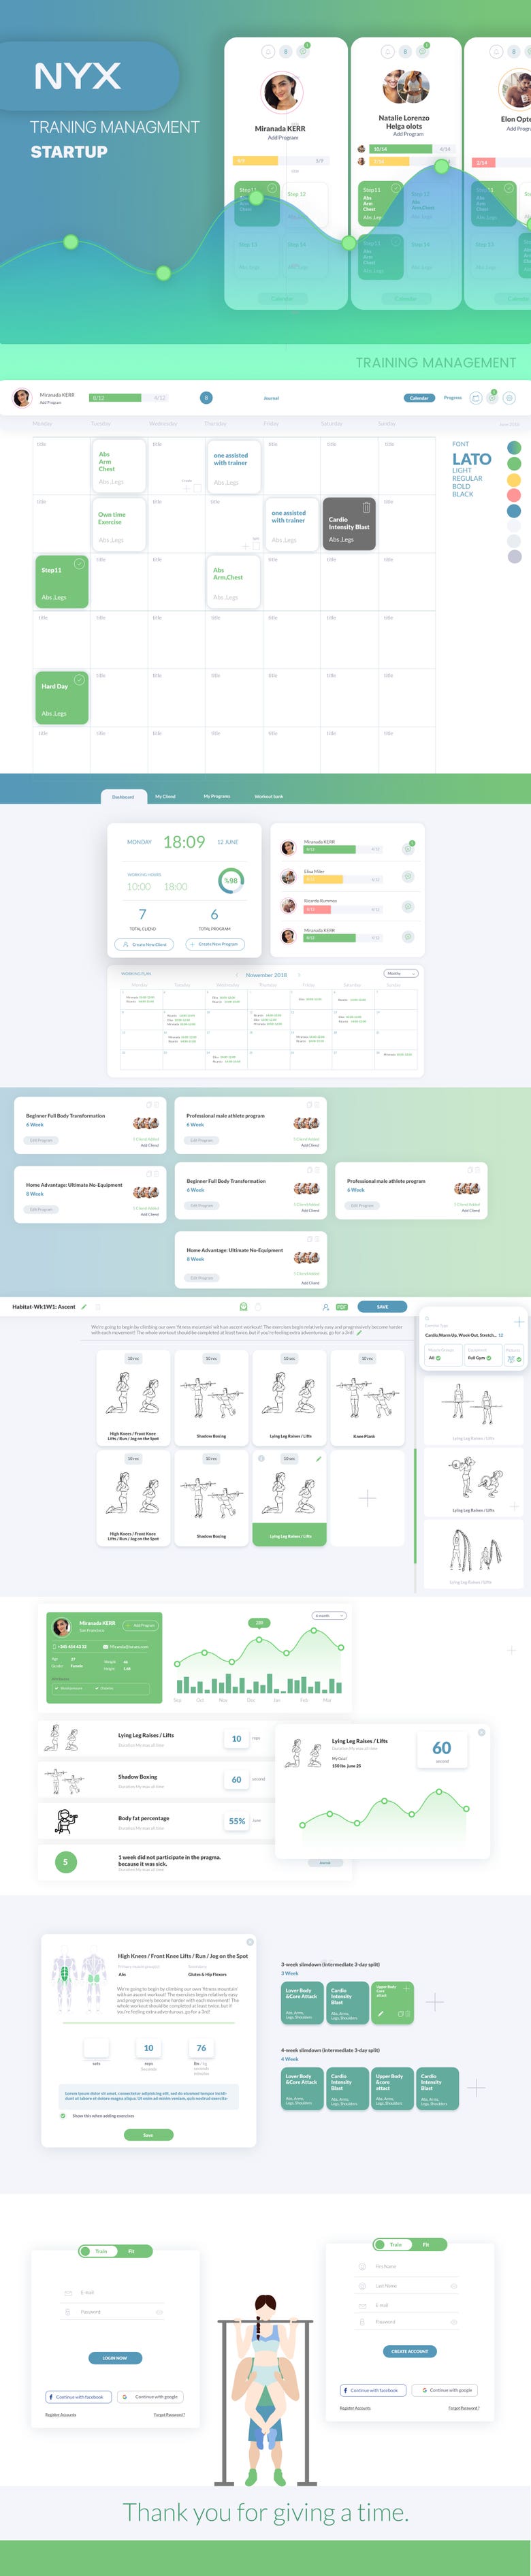 Fitness Training Management Project (STARTUP)